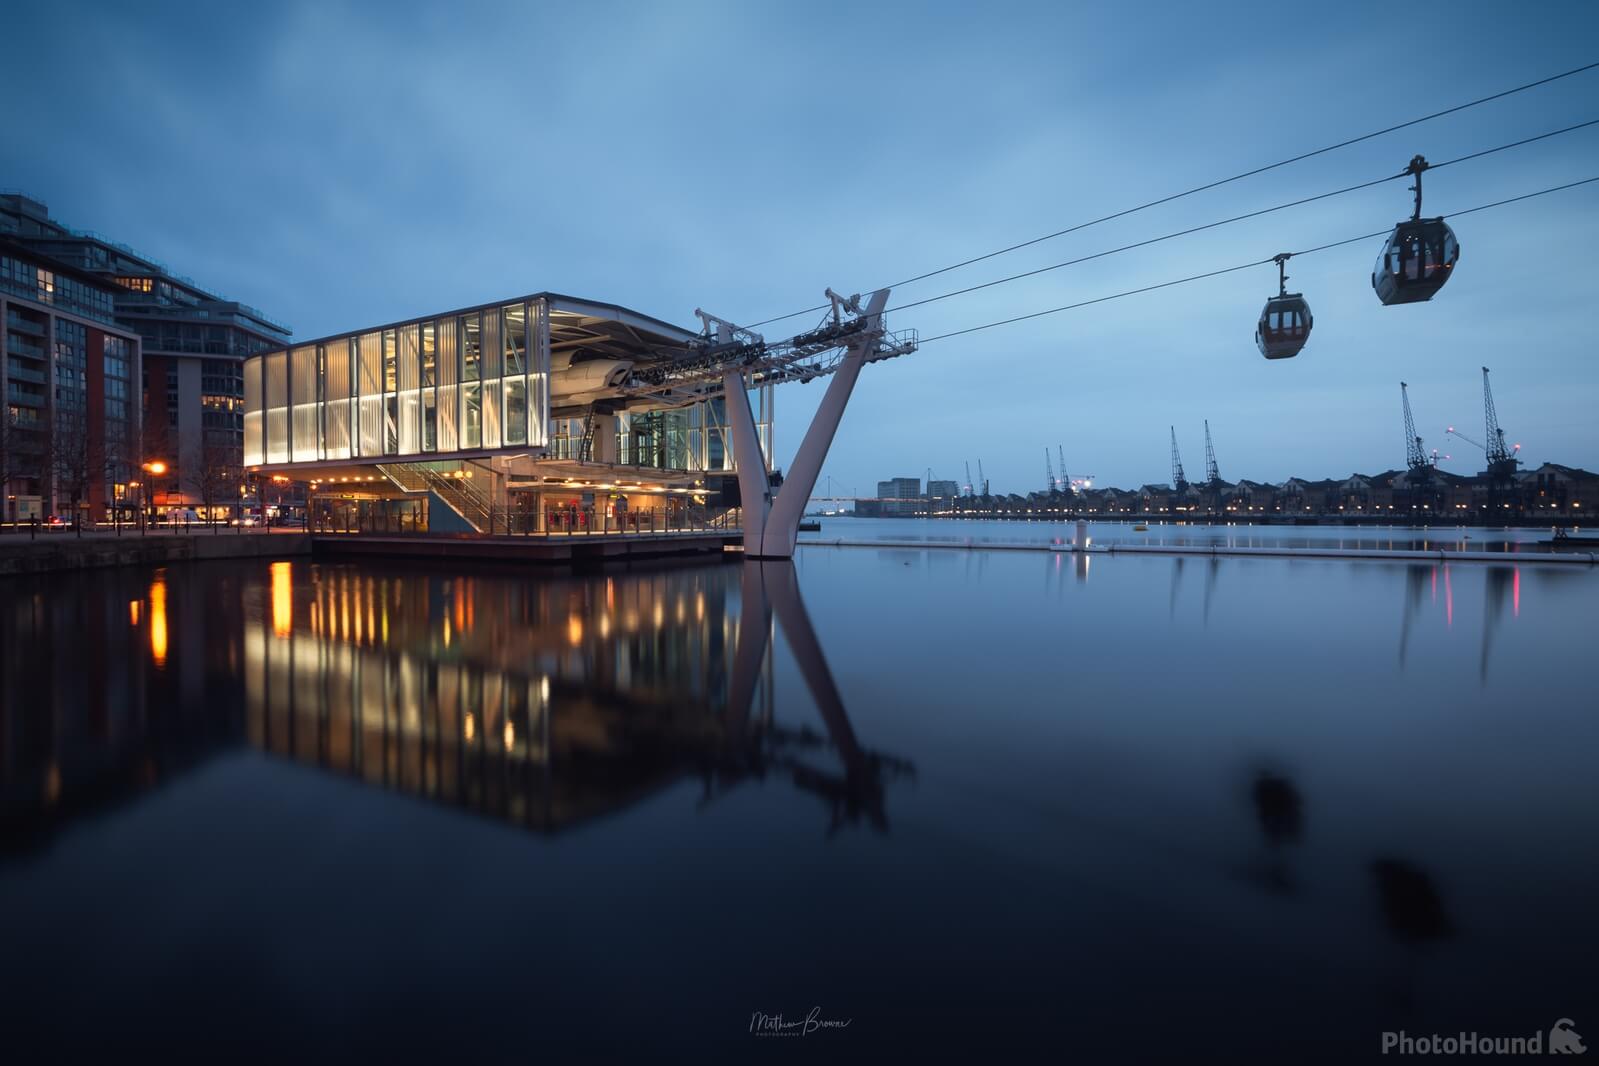 Image of Emirates Cable Car - Royal Victoria by Mathew Browne